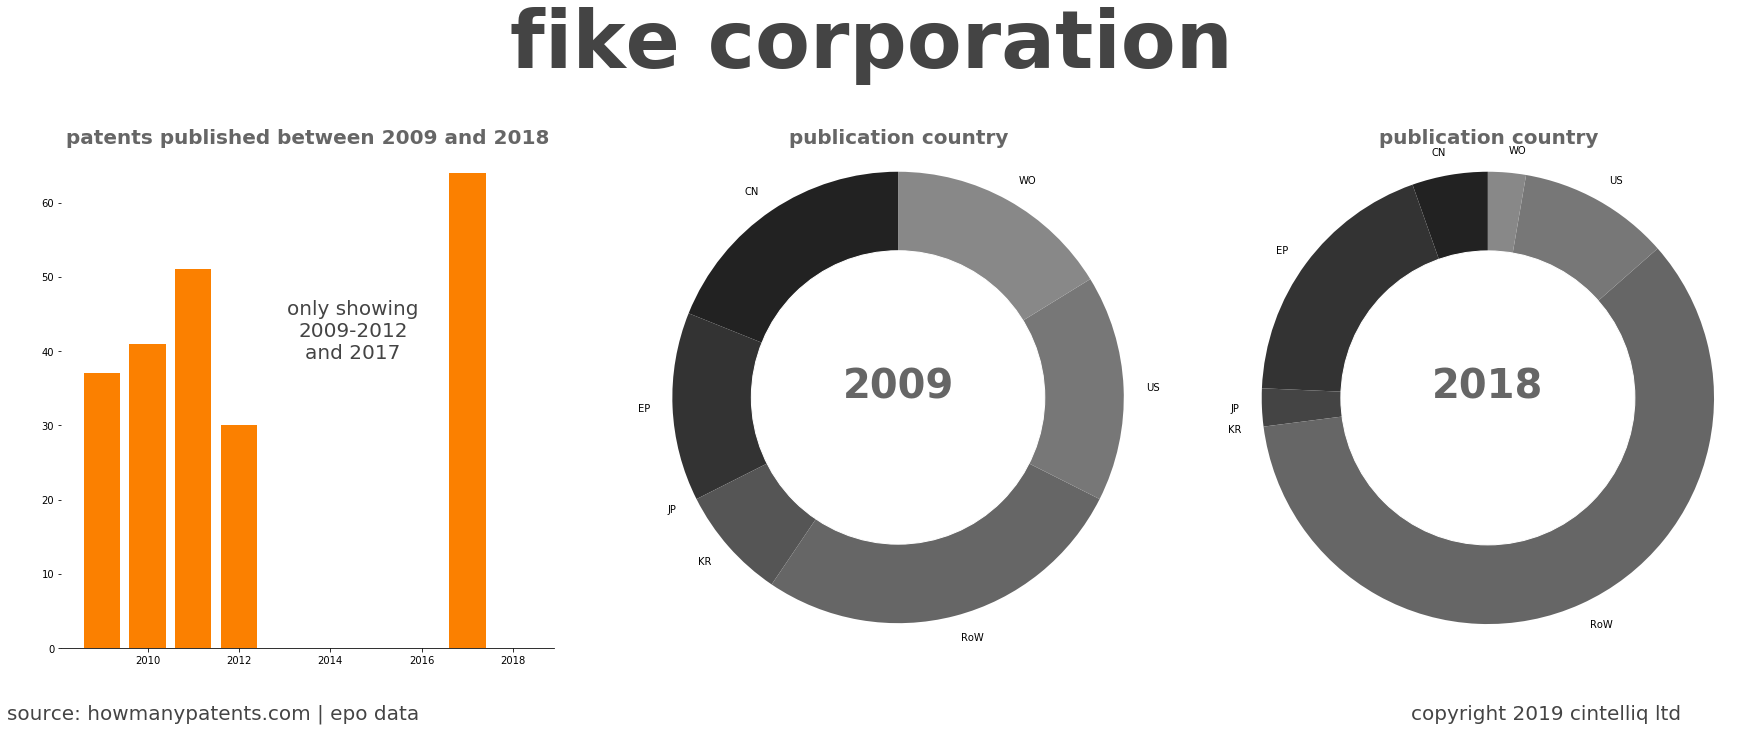 summary of patents for Fike Corporation